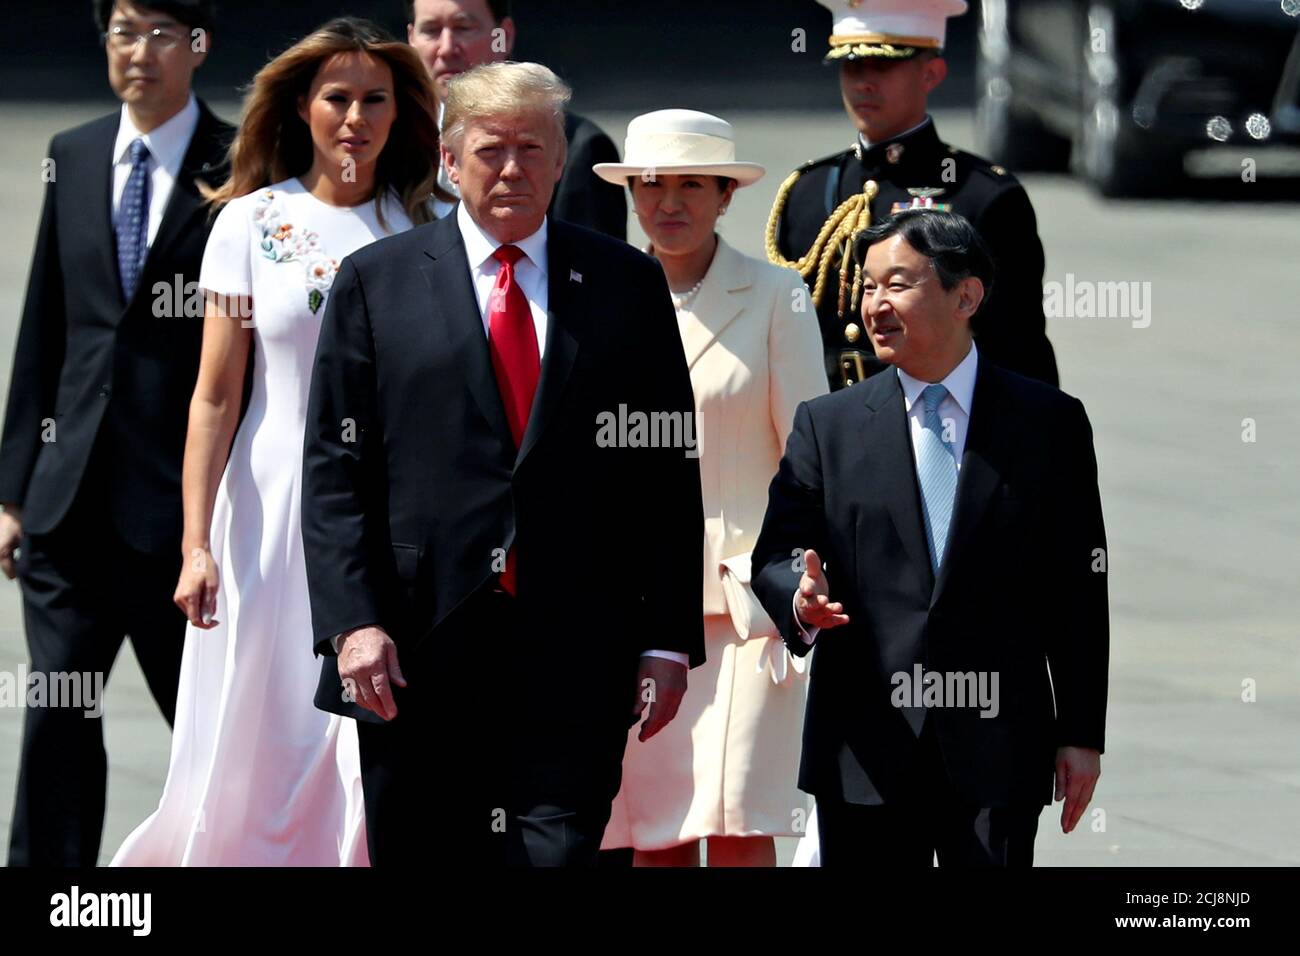 U.S. President Donald Trump and U.S. first lady Melania Trump are escorted  by Japan's Emperor Naruhito and Empress Masako during an welcome ceremony  at the Imperial Palace in Tokyo, Japan May 27,